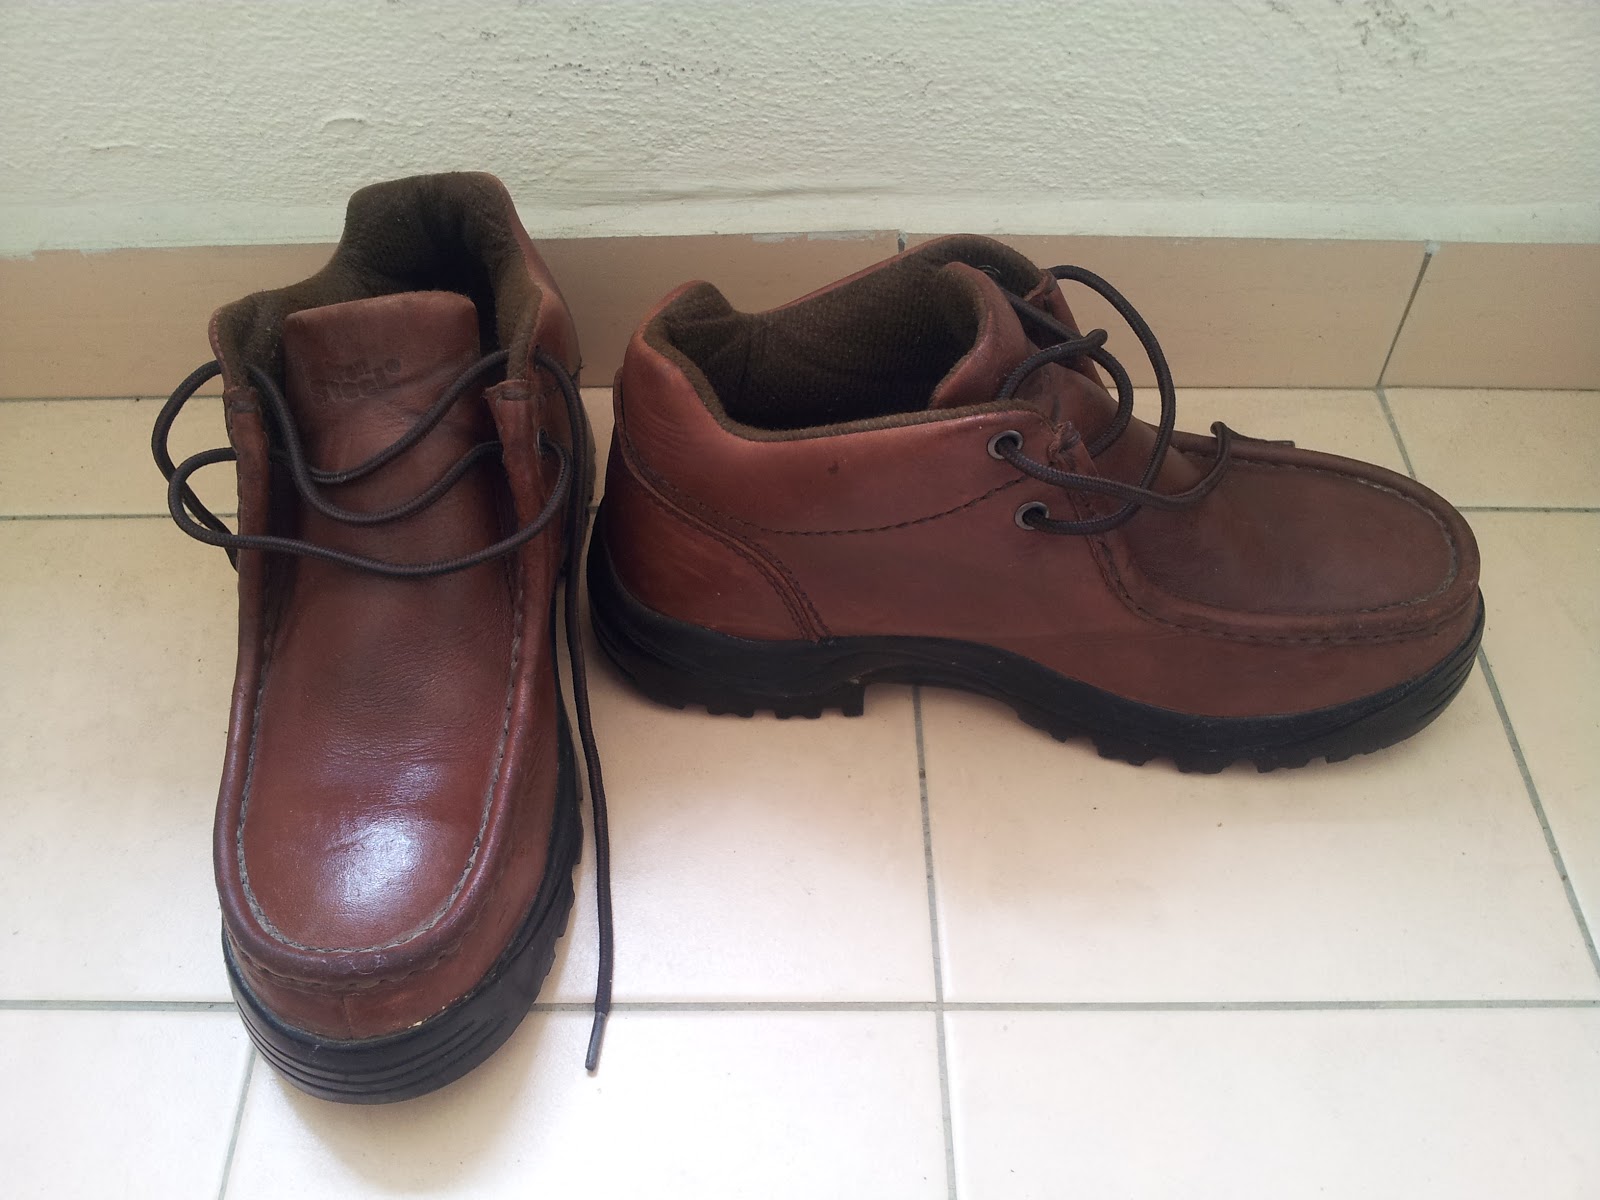 3Q-Qaseh Collection: IRON STEEL SAFETY SHOE - Steel Toe